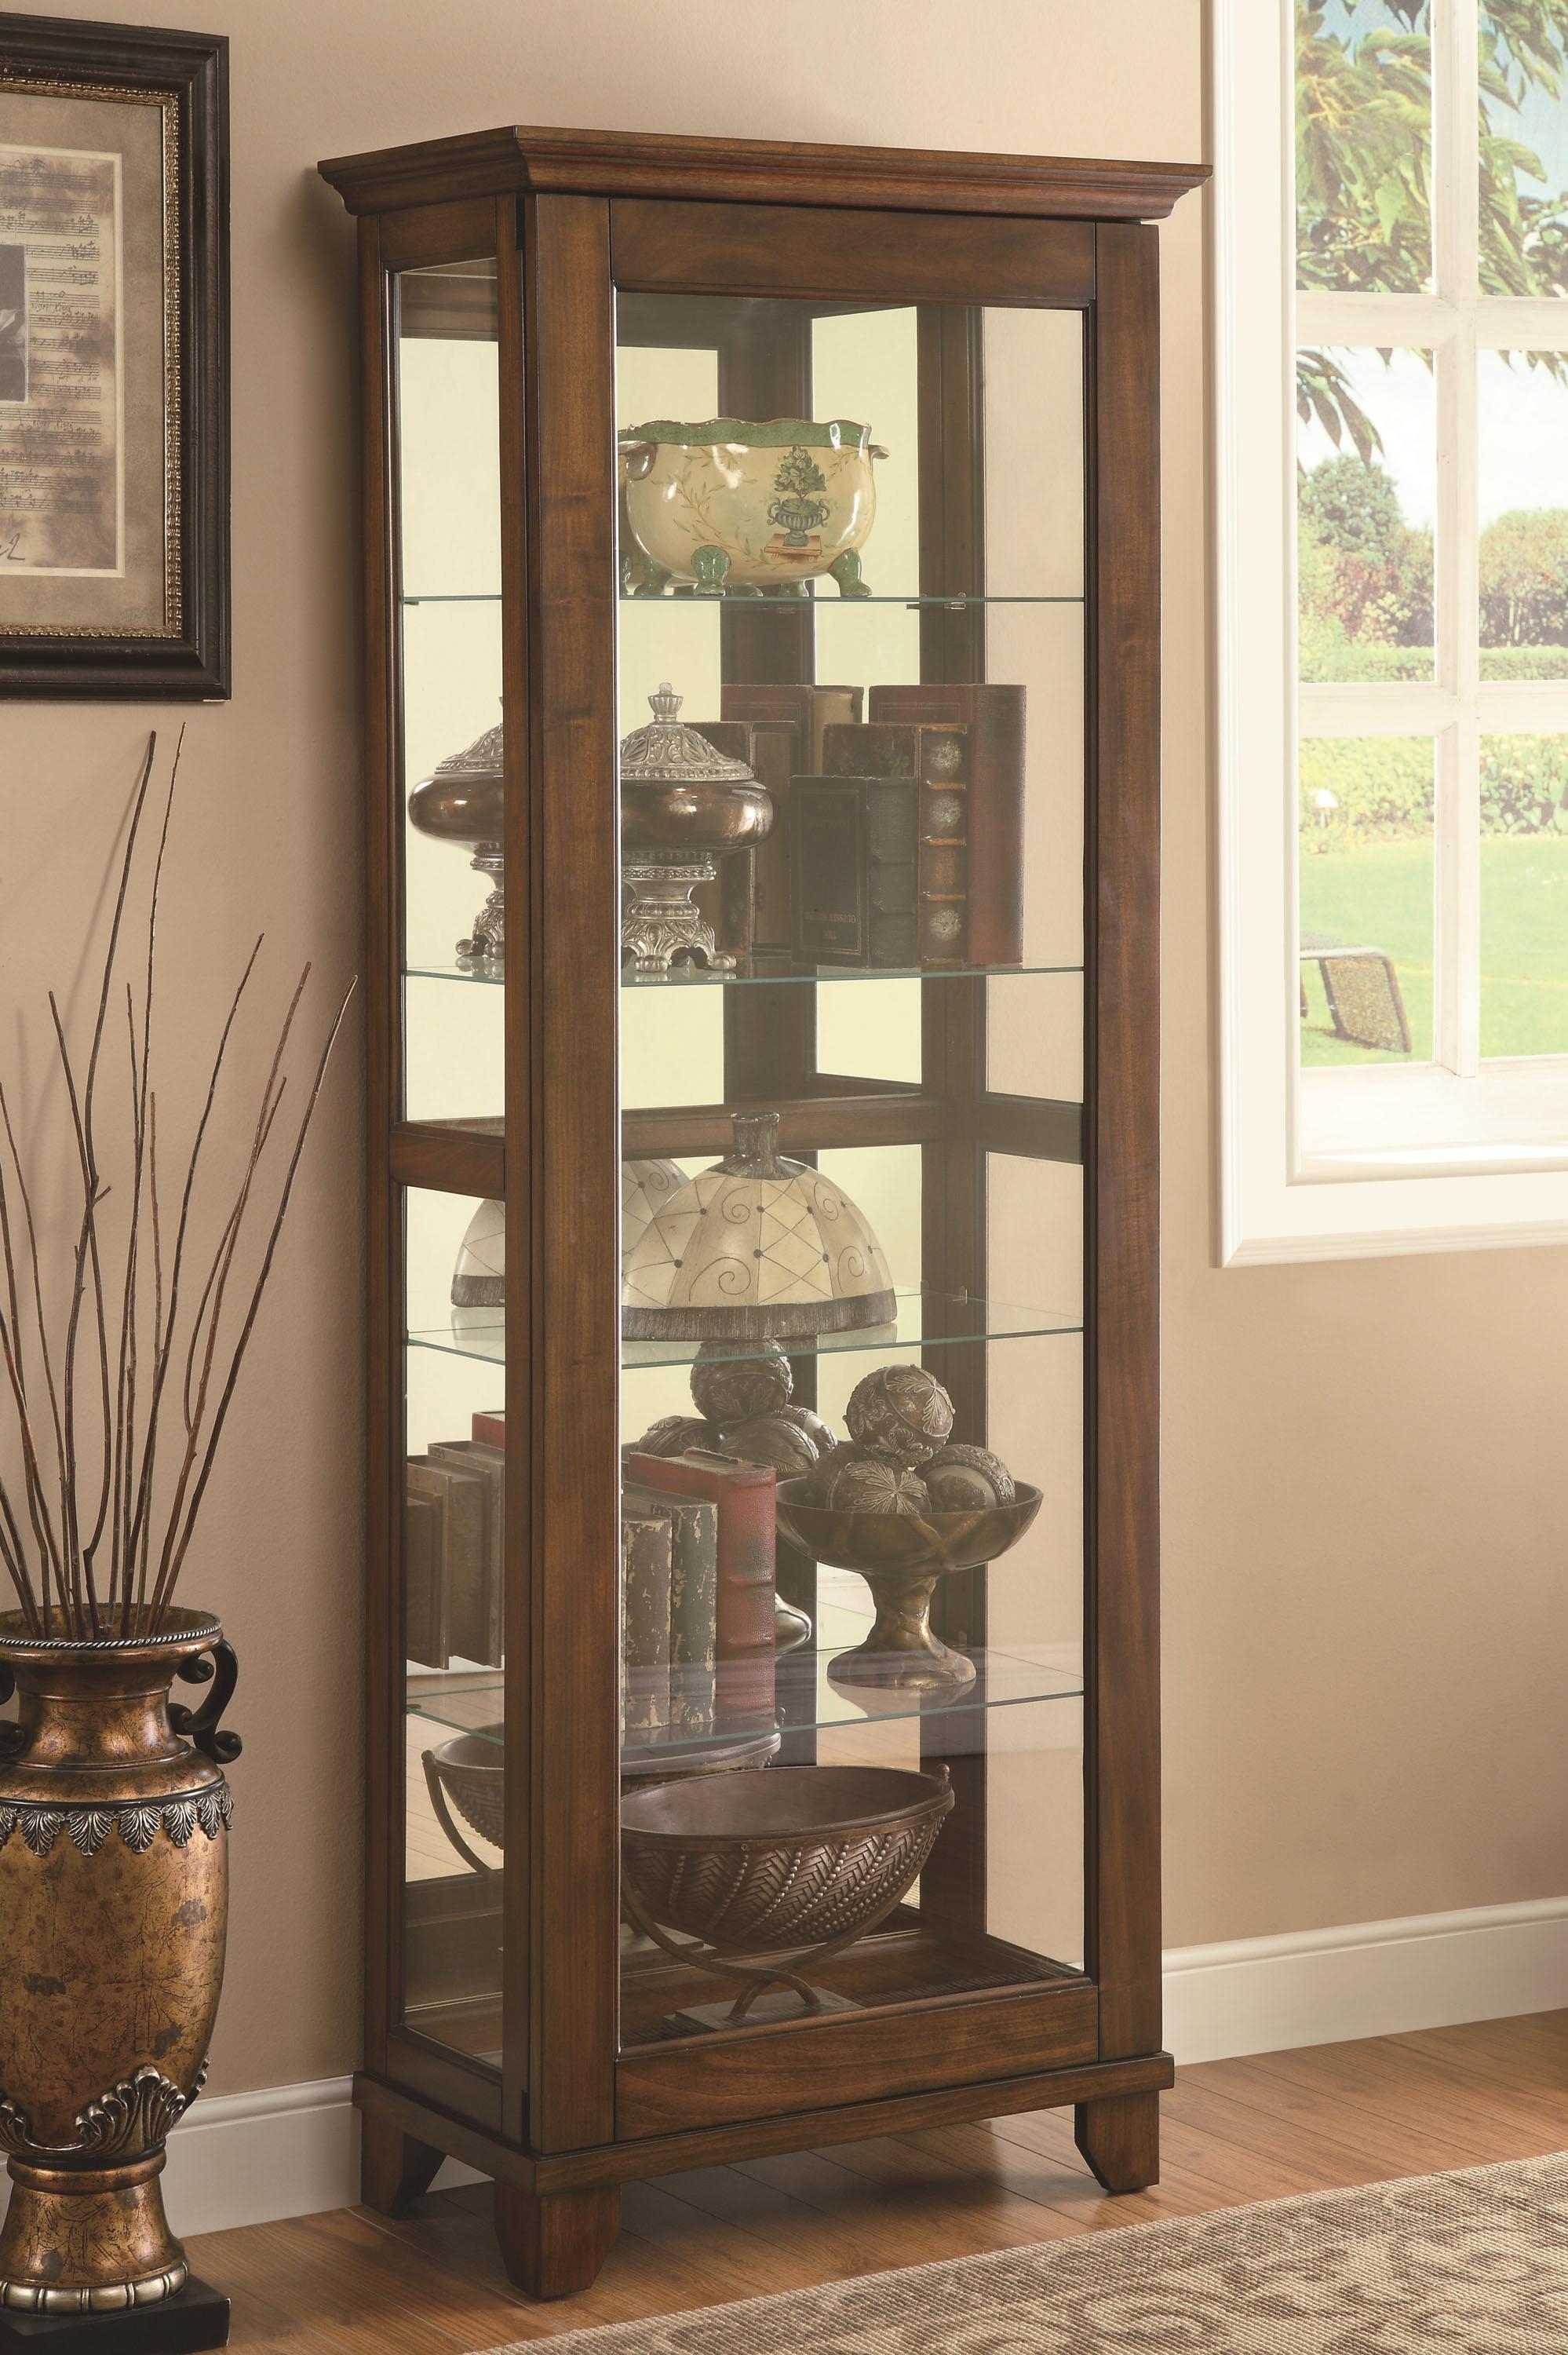 5 shelf curio cabinet with warm brown finish mirrored back